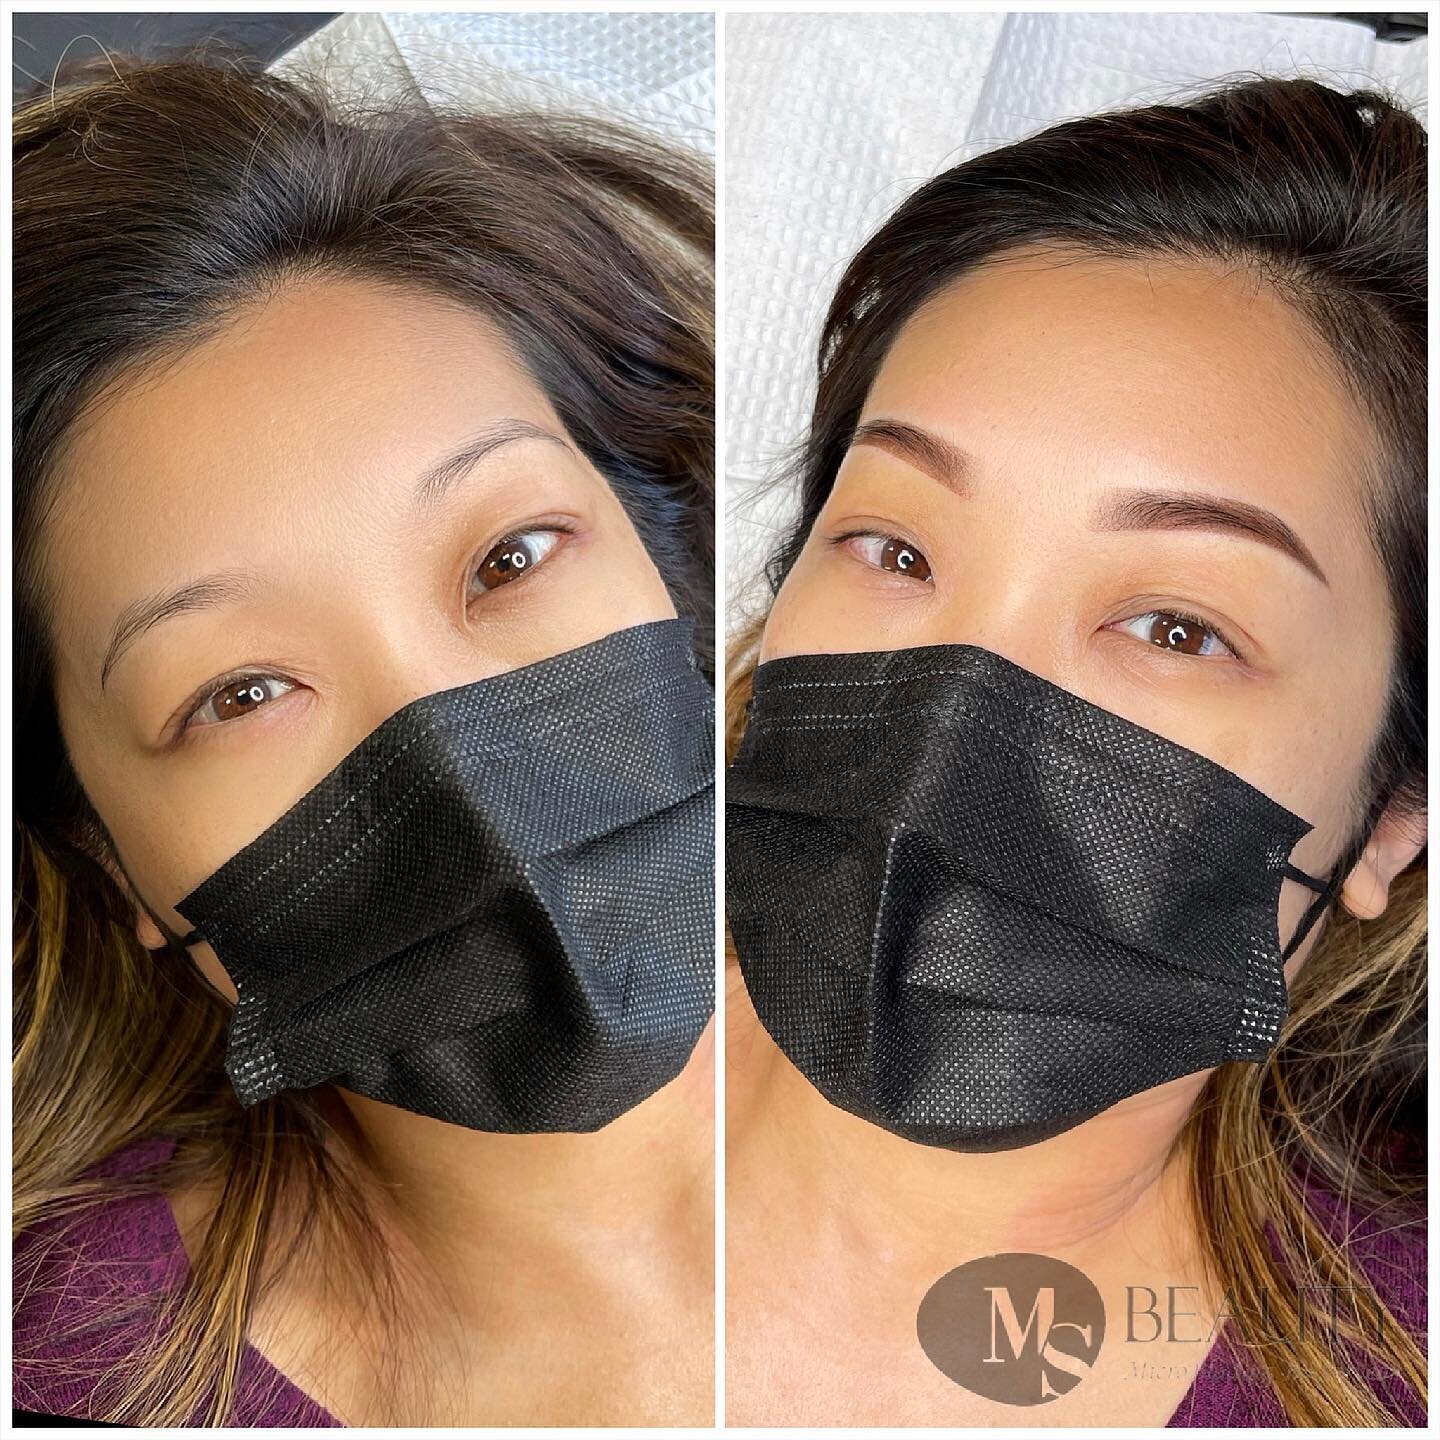 .
Ombr&eacute; shading 
Immediately after 
It is always pleasure to hear client say &ldquo;Perfect!&rdquo; after the session. 
.
.

𝐌𝐬&nbsp;𝐛𝐞𝐚𝐮𝐭𝐲
⠀
▪️Introduced and published in reliable and recognized media oulets in Korea (VJ특공대,&nbsp